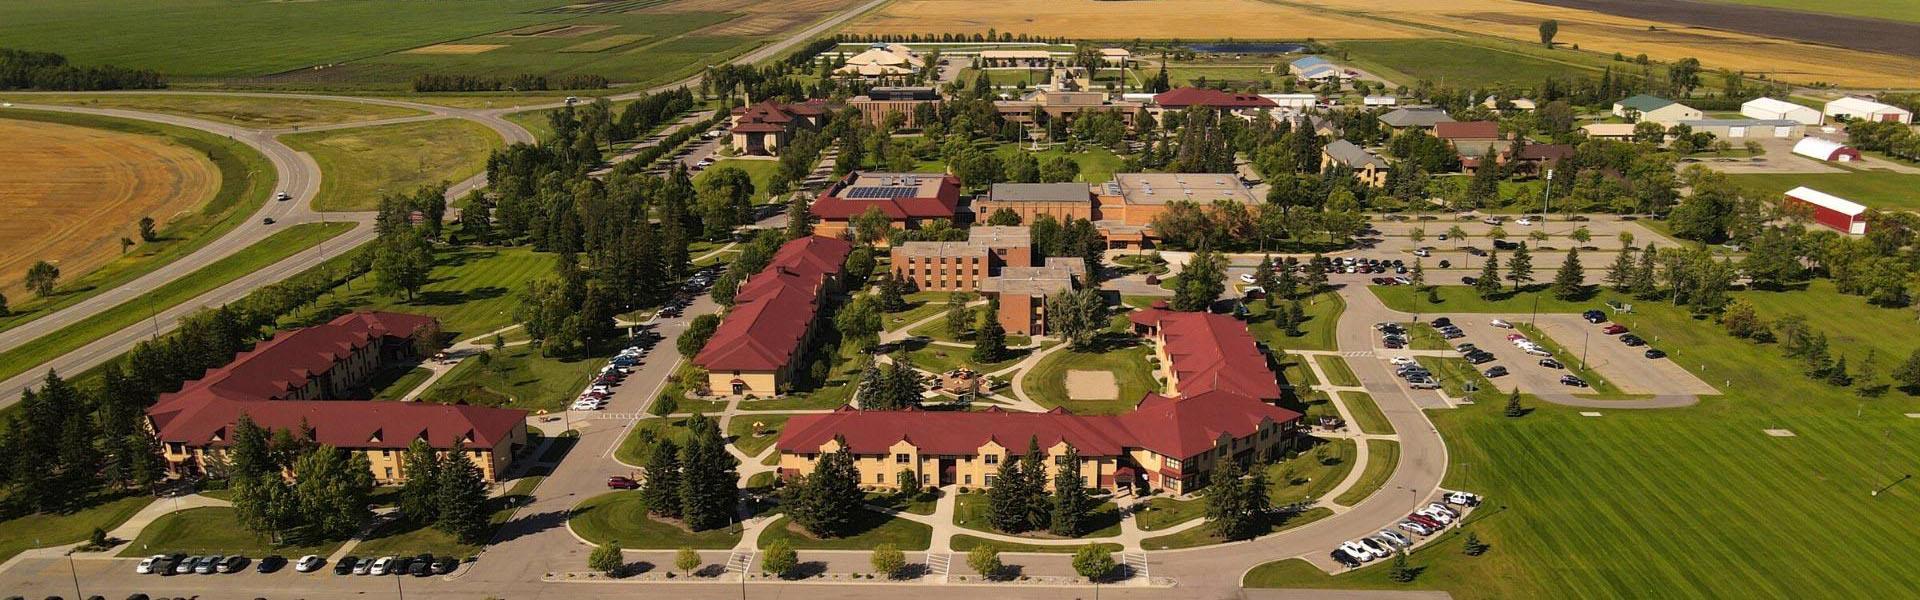 Aerial photo of the University of Minnesota Crookston from the south looking north